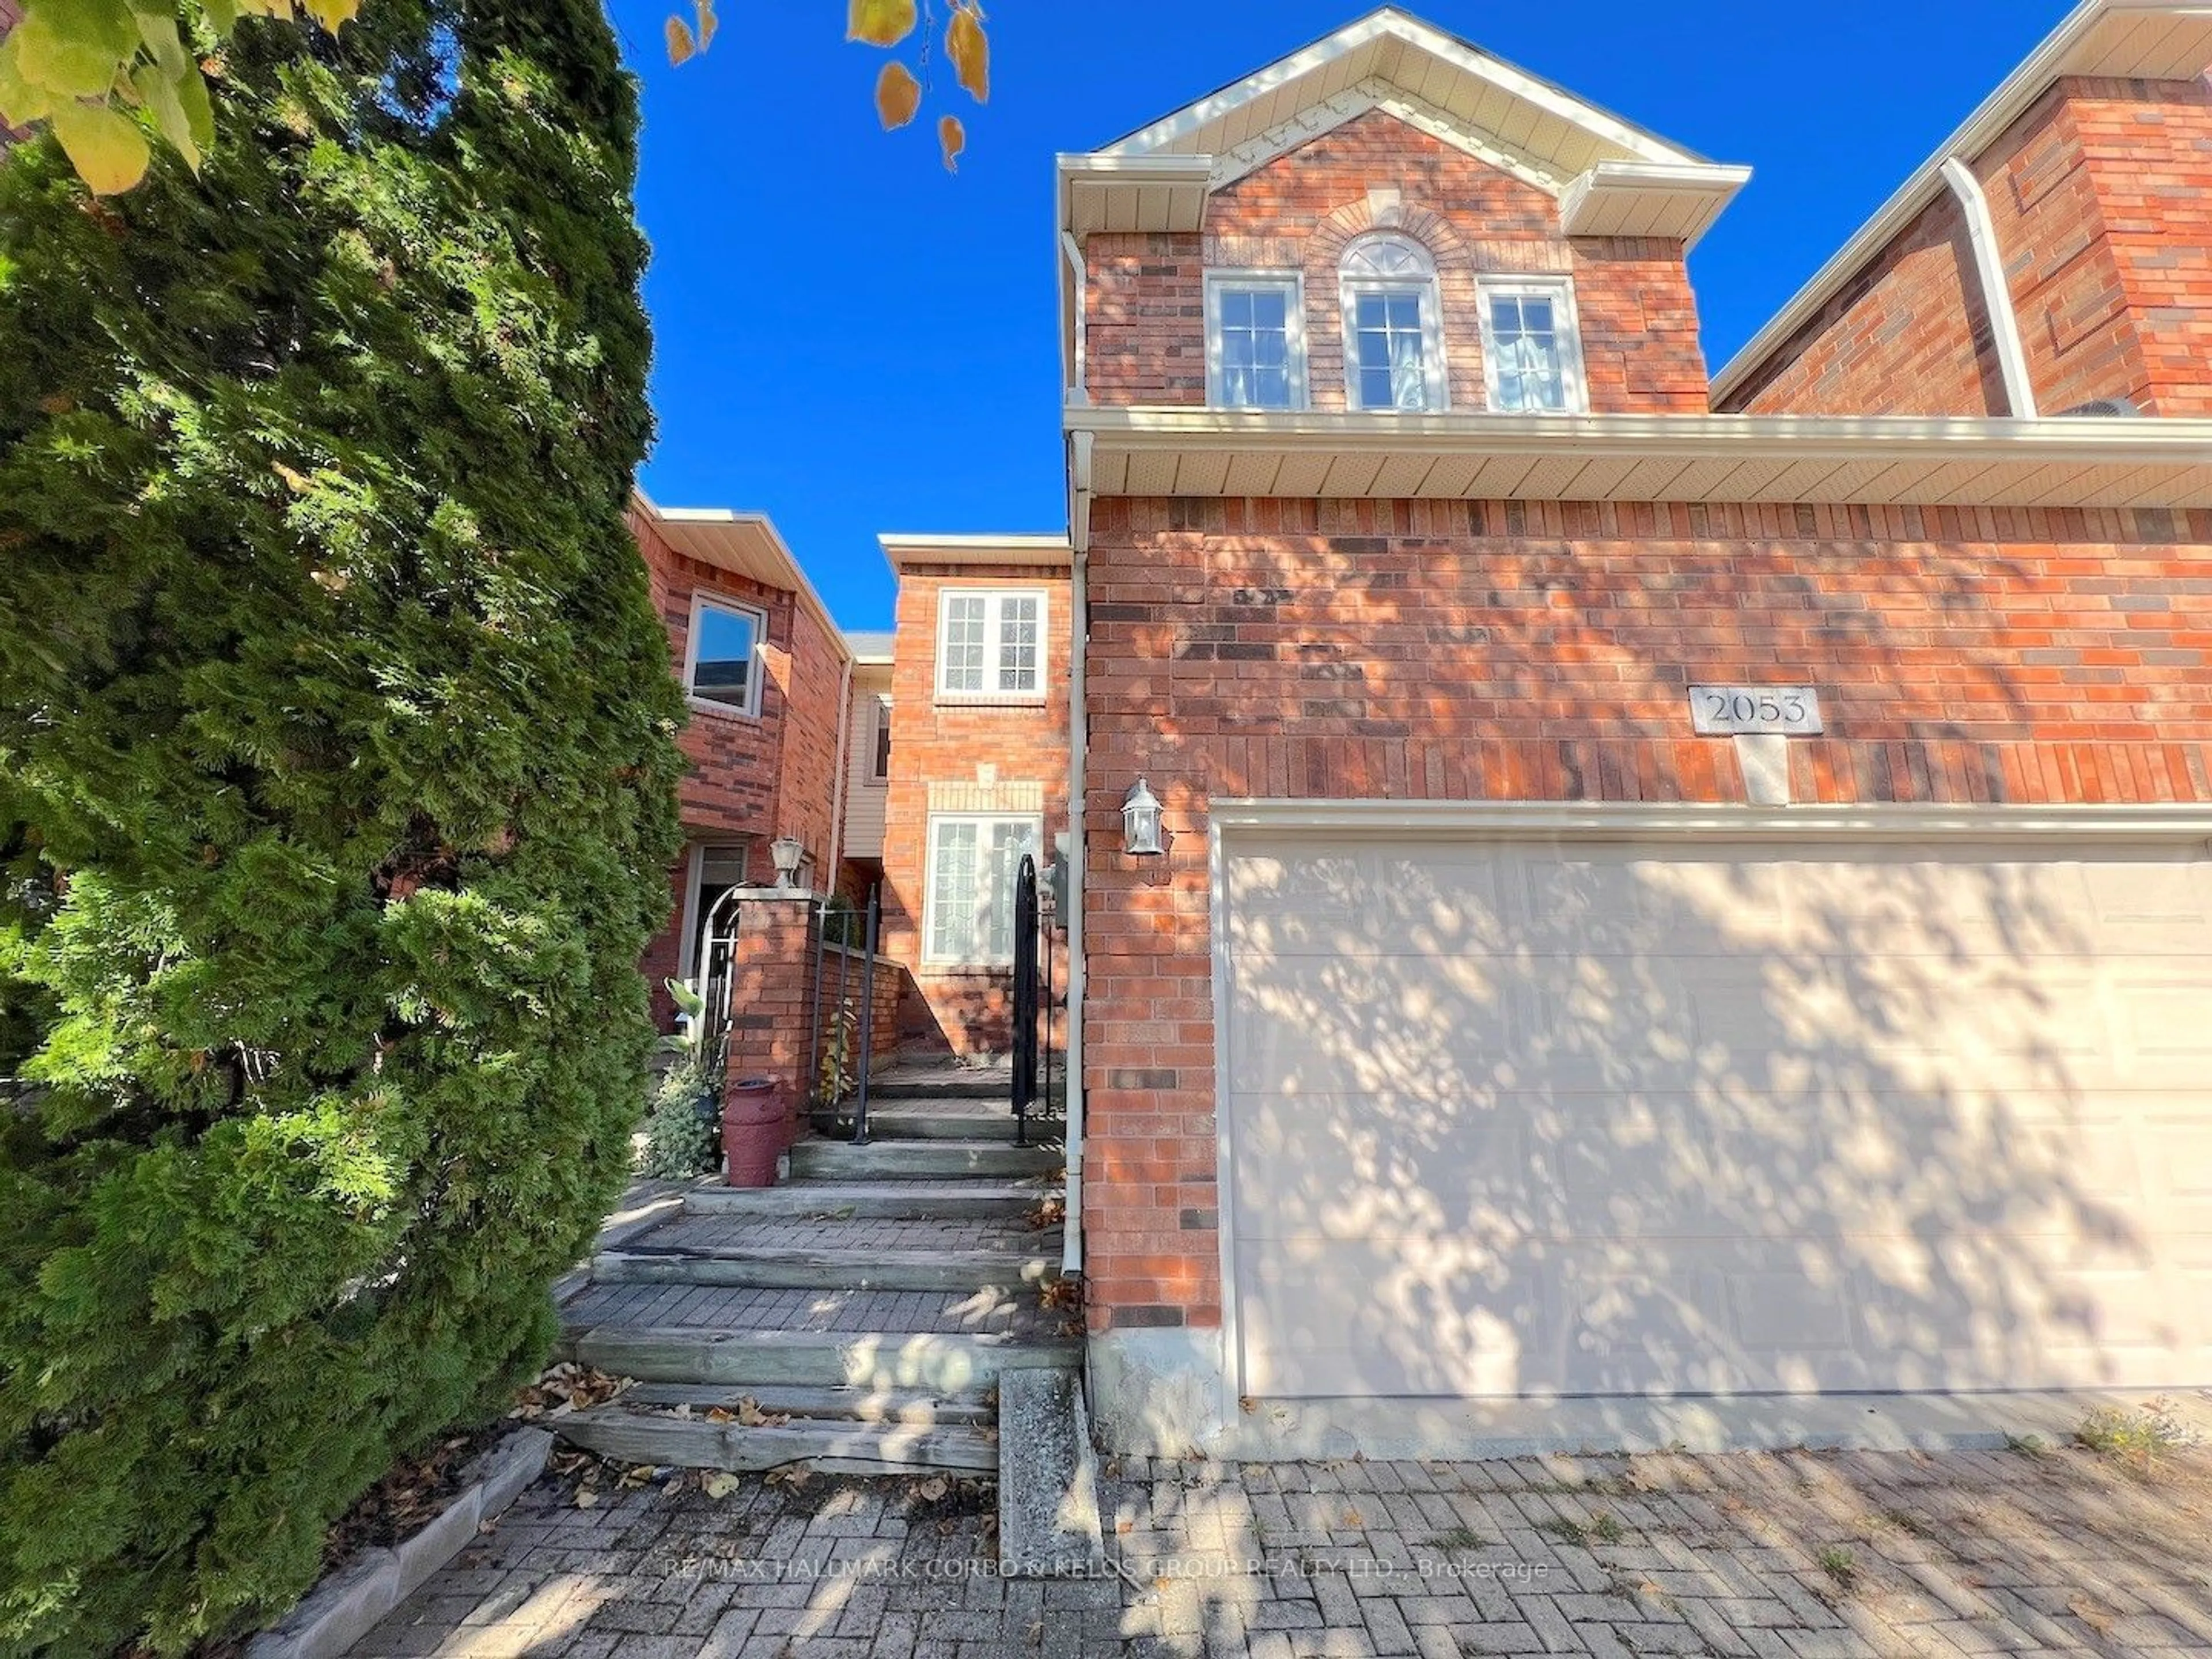 Home with brick exterior material for 2053 Brays Lane, Oakville Ontario L6M 2S8